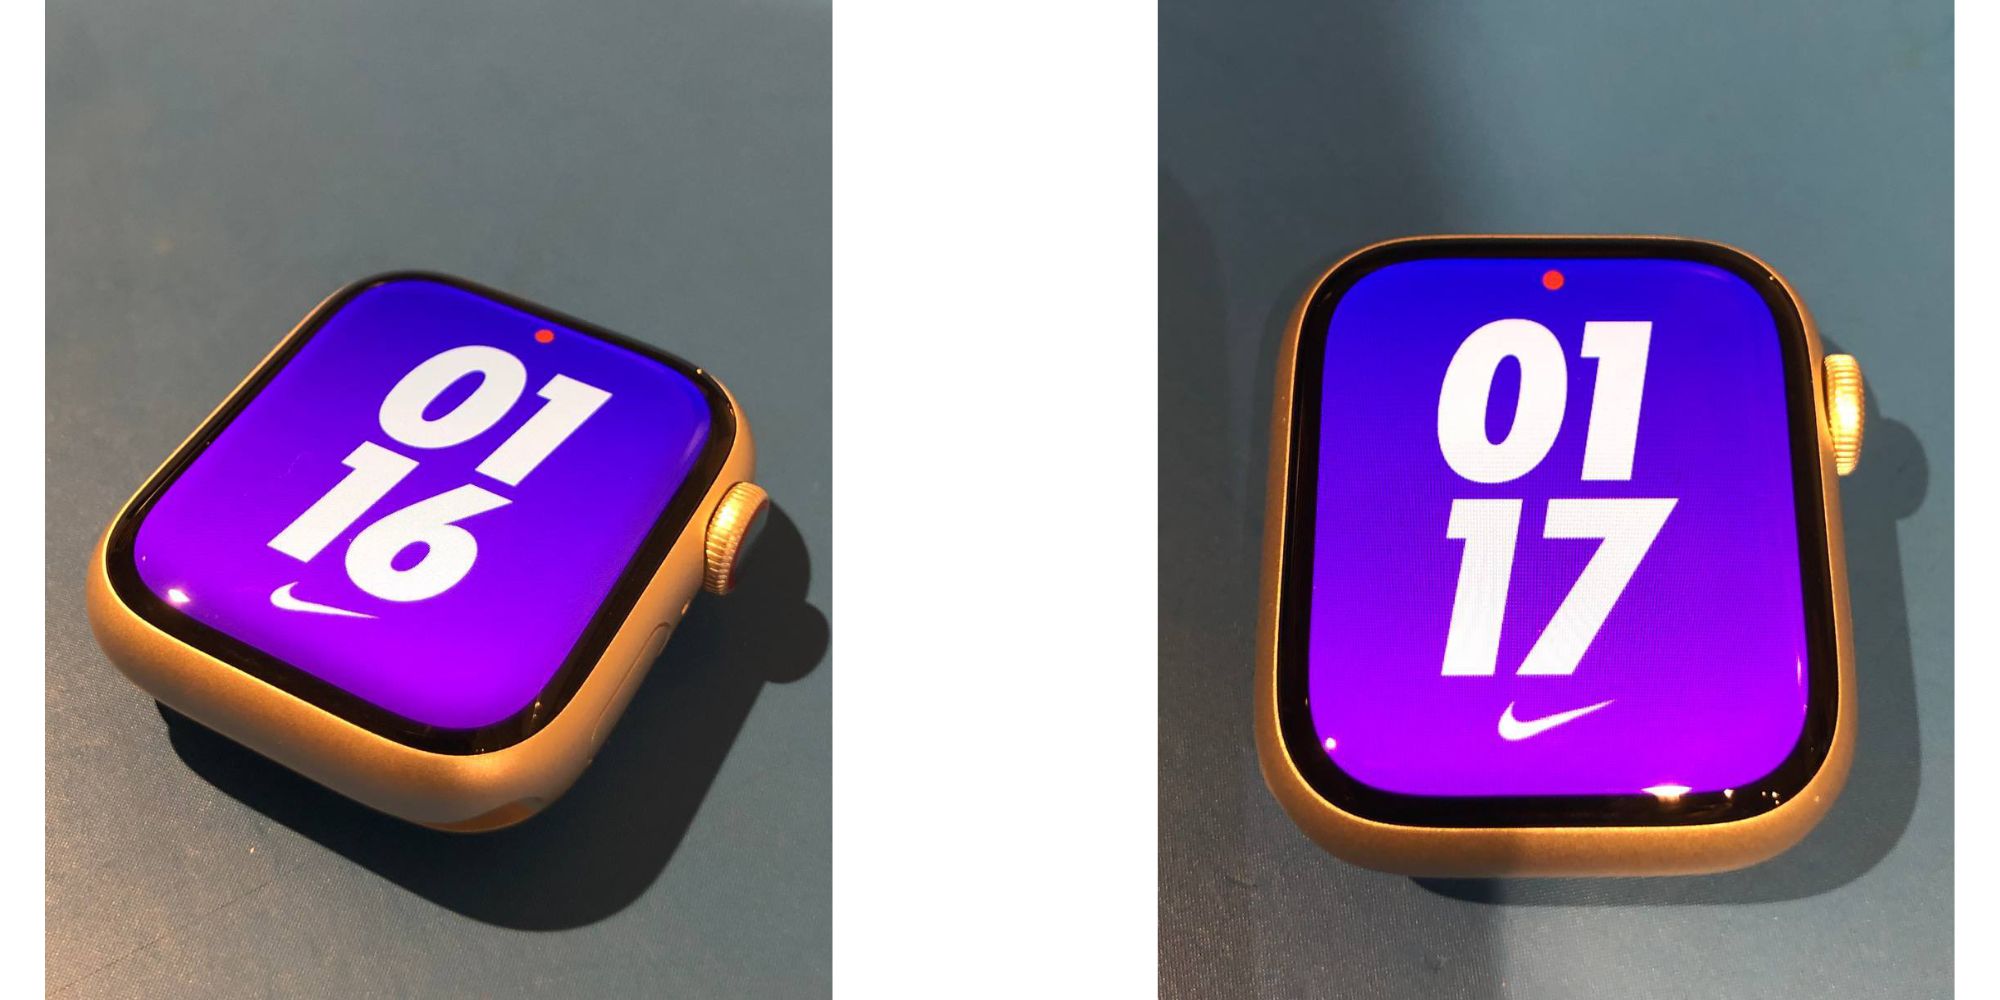 Apple Watch Series 7’s New Display Looks Massive In This Comparison Photo